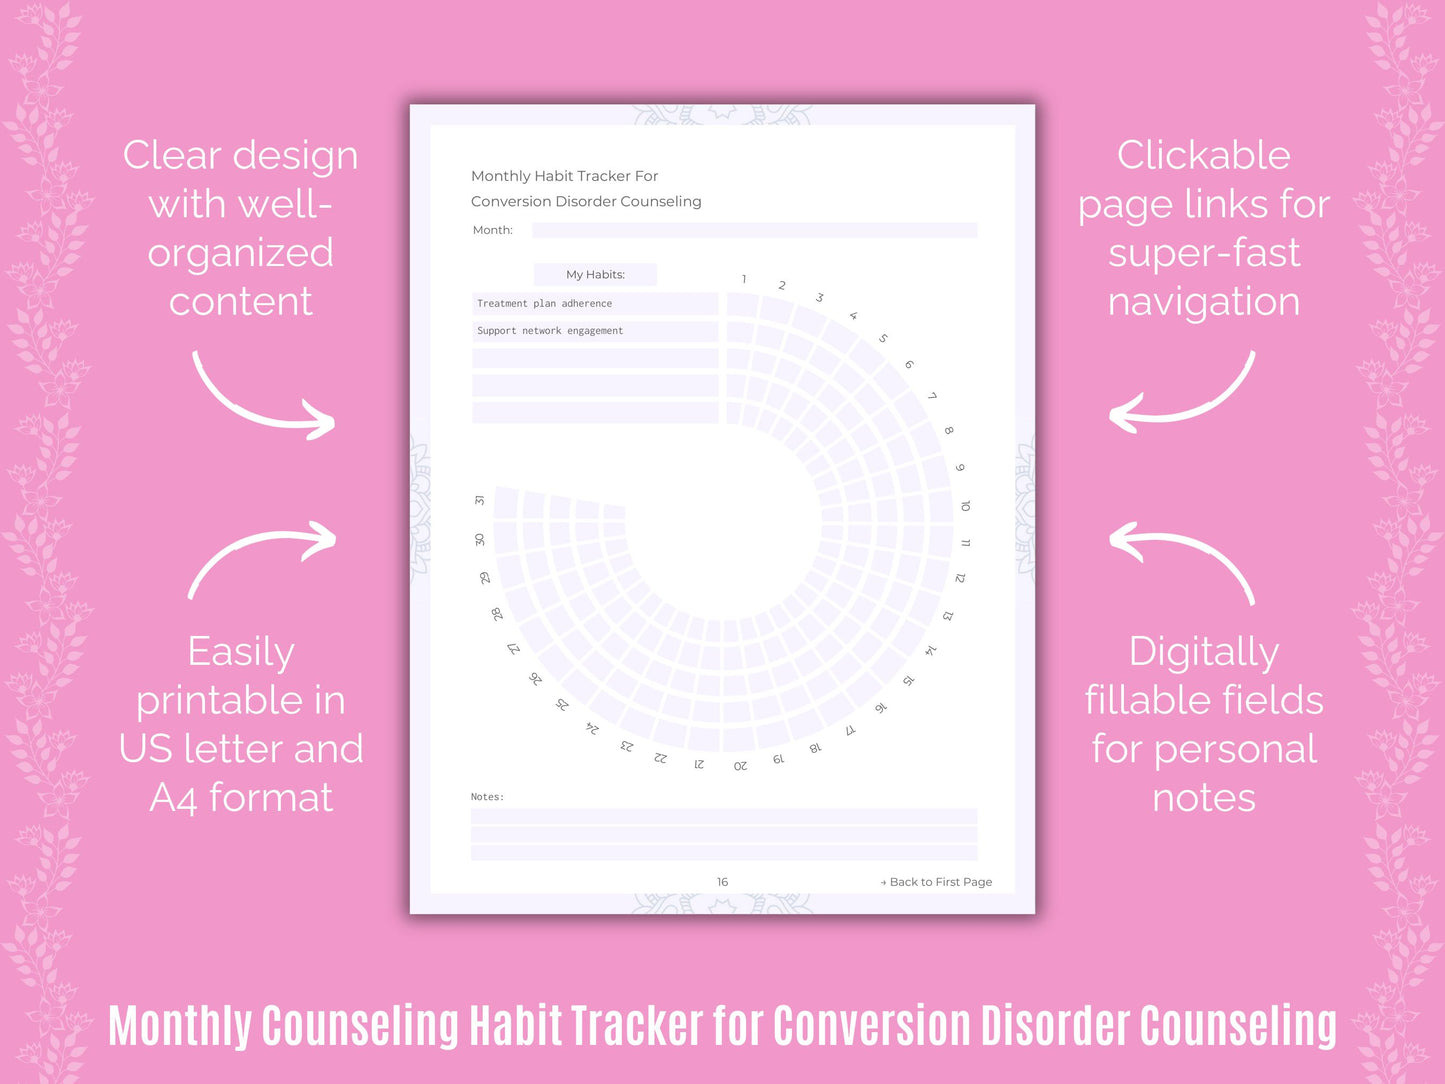 Conversion Disorder Counseling Cards